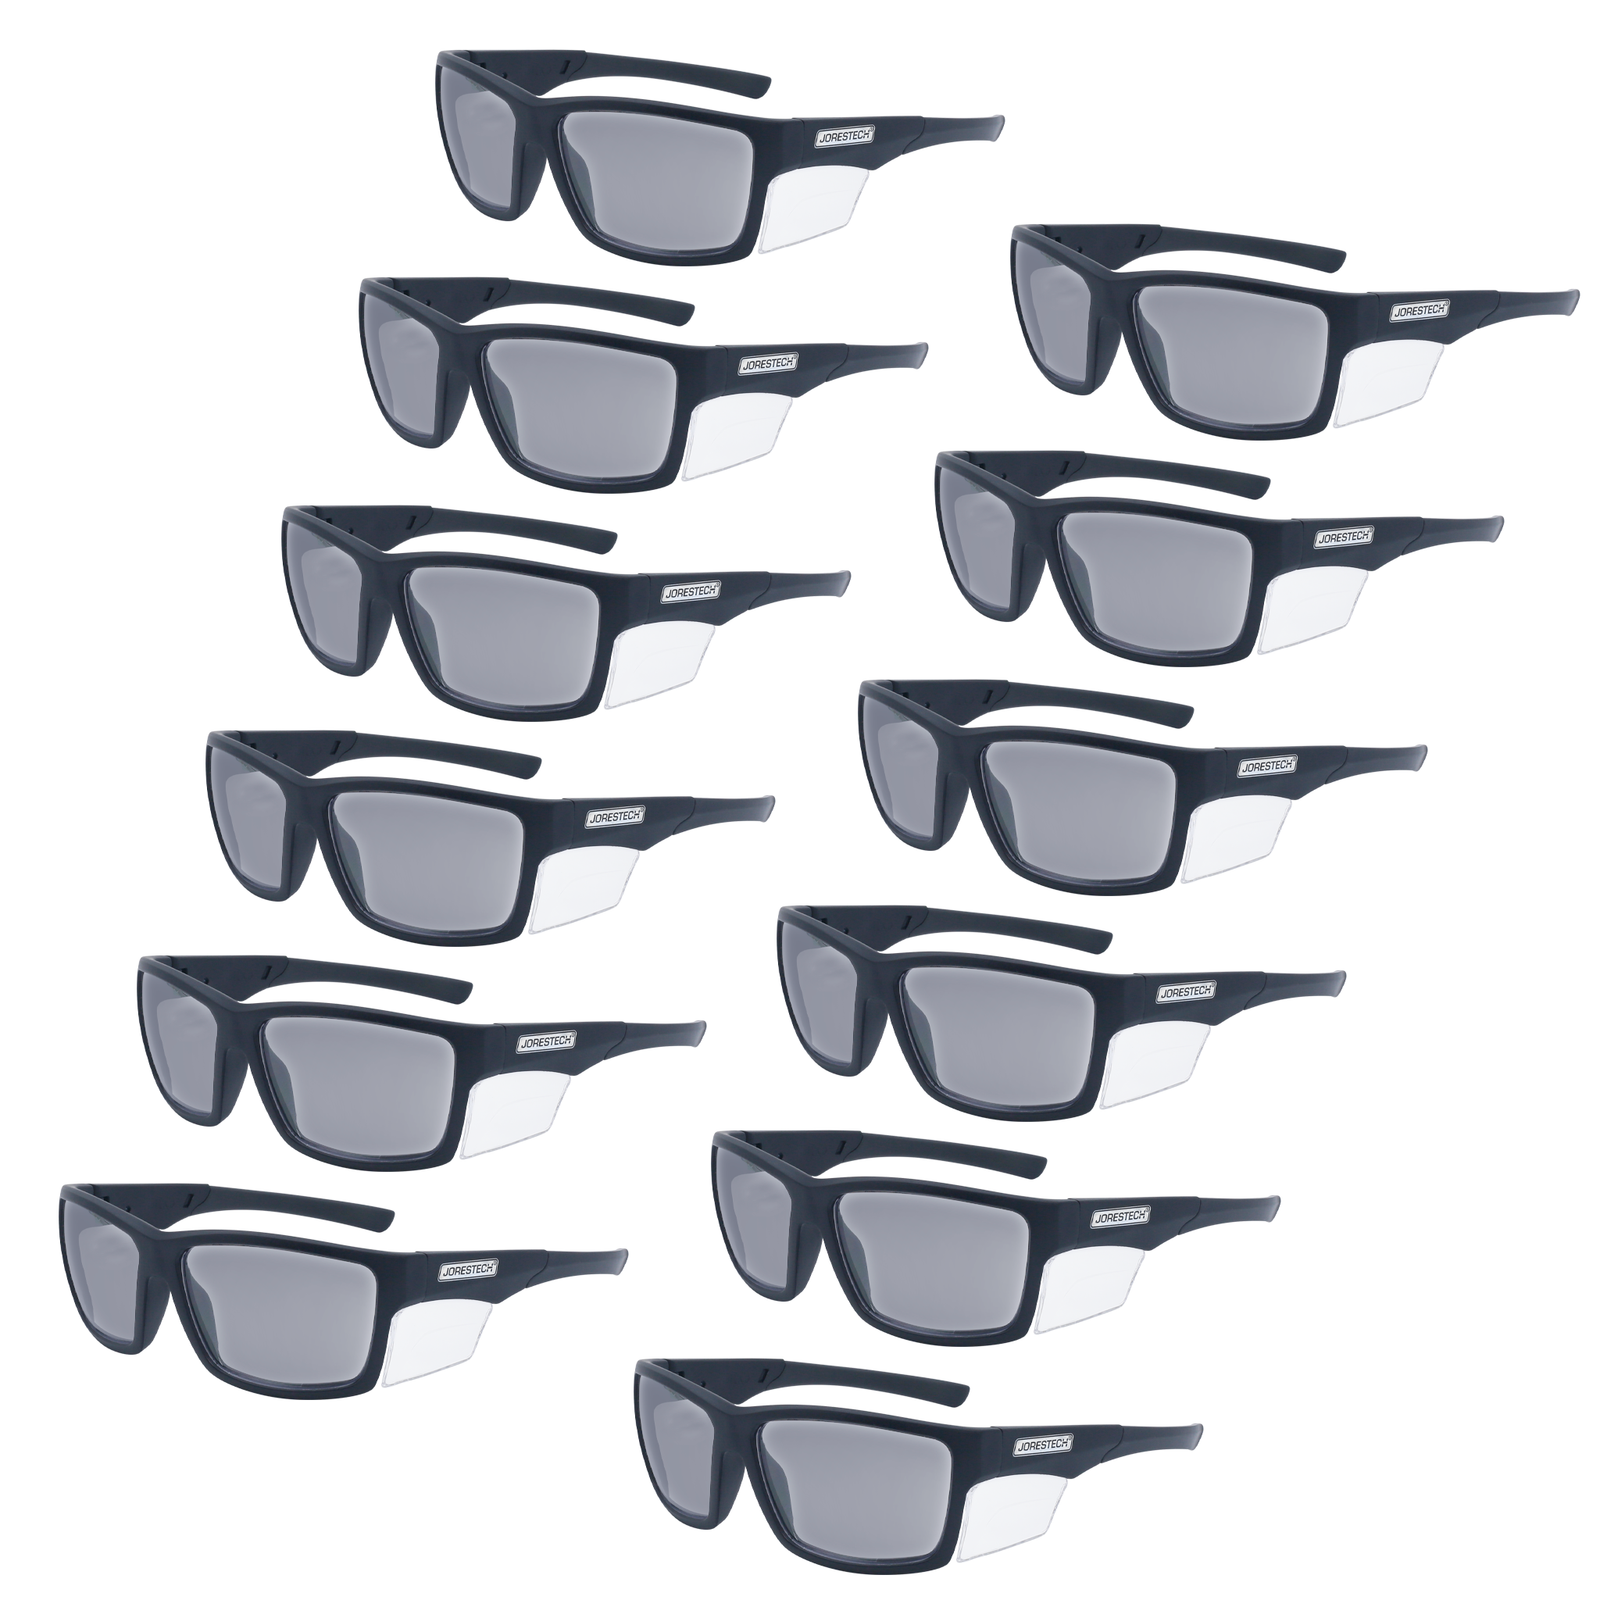 Image shows 12 pairs of JORESTECH smoke safety sun glasses with clear side shield for high impact protection. These ANSI compliant safety glasses have black frame and smoke polycarbonate lenses. The background of the image is white